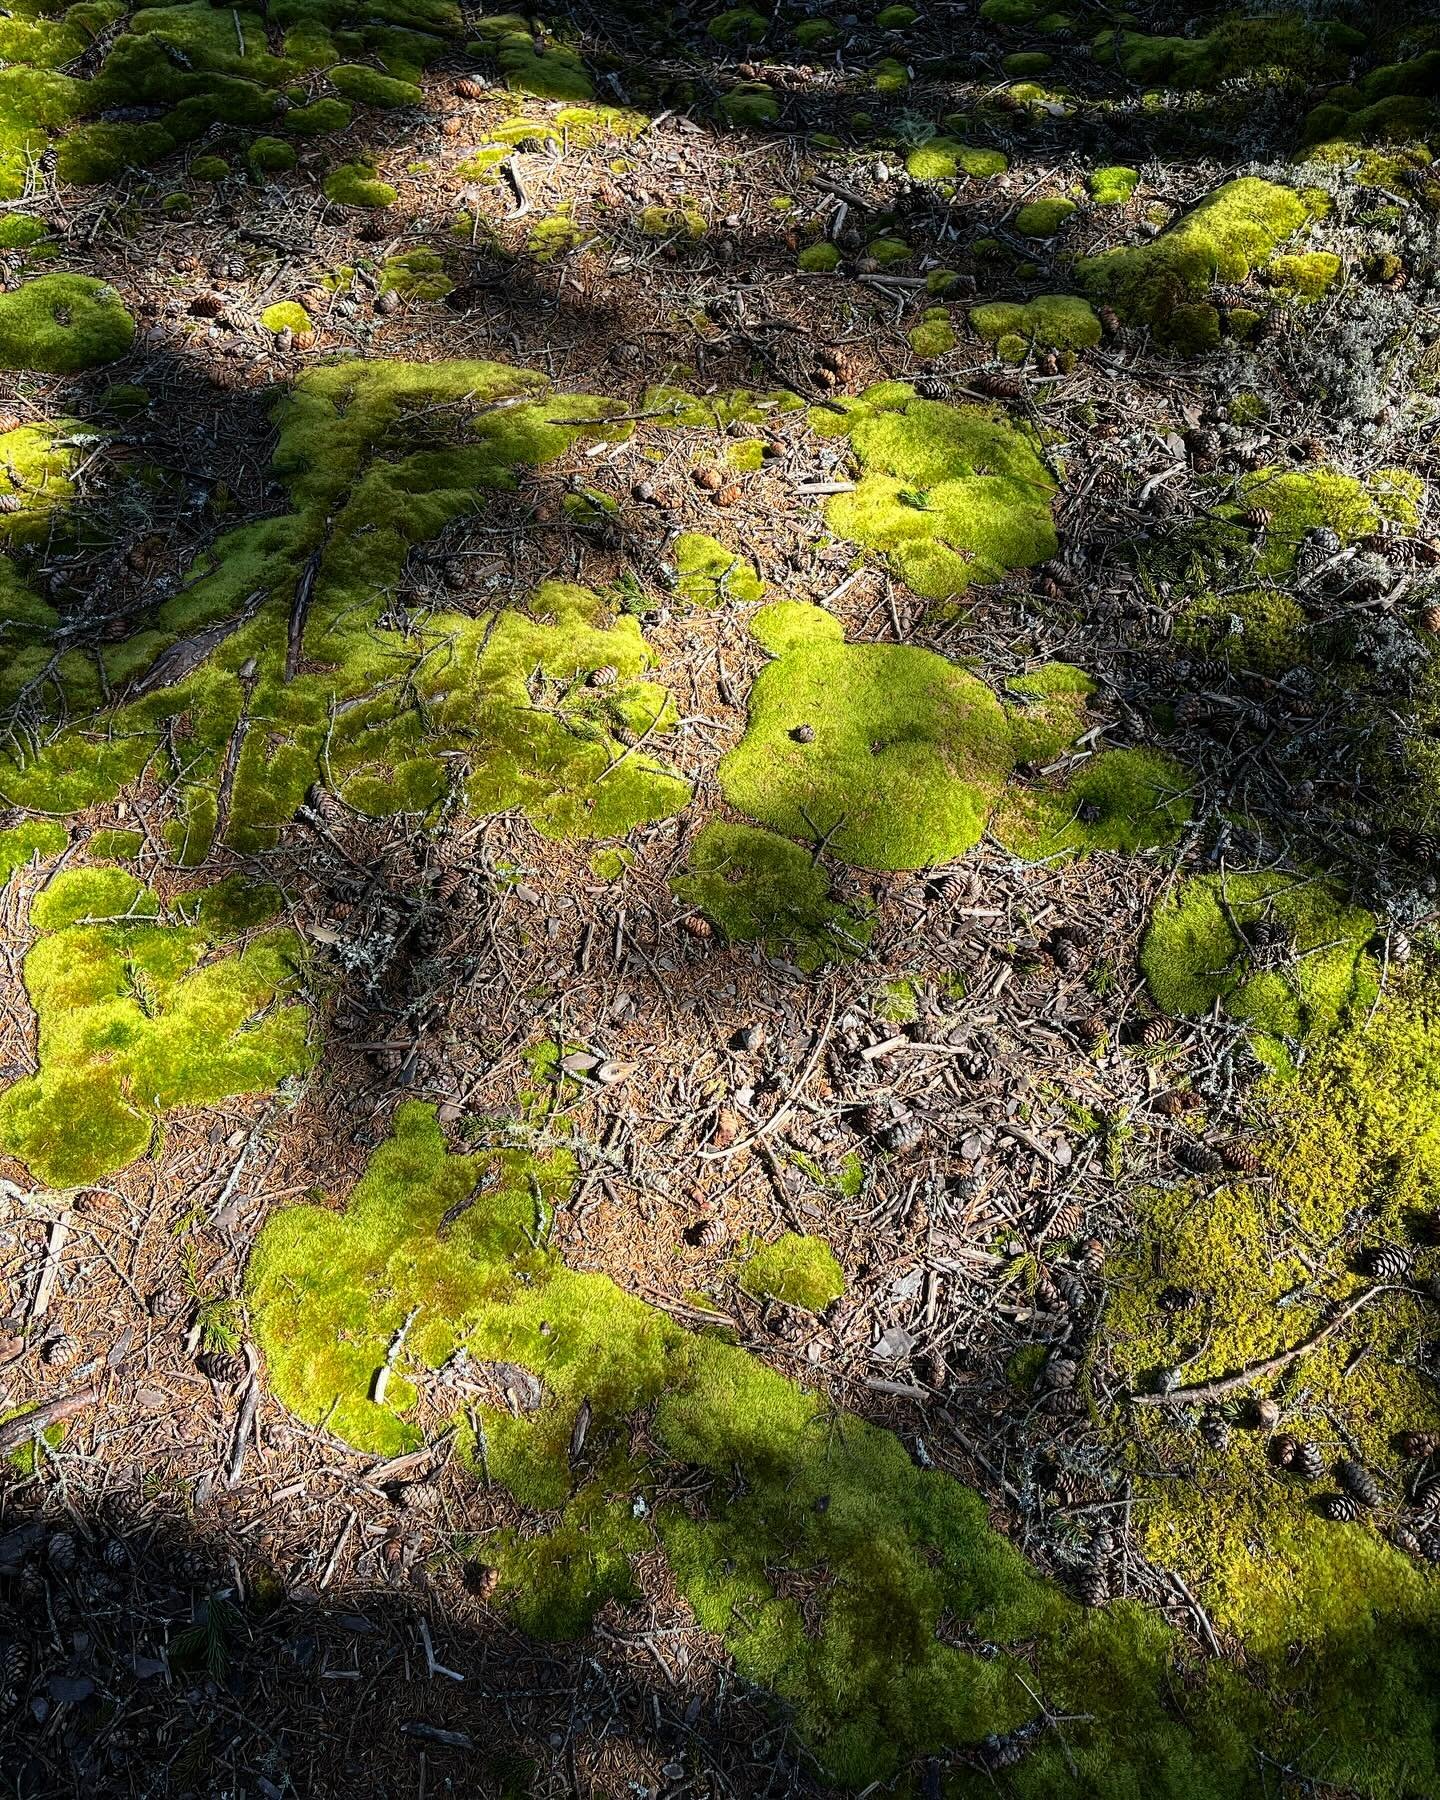 I dont know if I&rsquo;ve ever really noticed how moss grows outward from a central locus, like mold or fungi. Beautiful brilliant blobs of green in the dappled light of a spring morning.
Herbert Preserve. 

#moss #maine #spring #ecology #conservatio